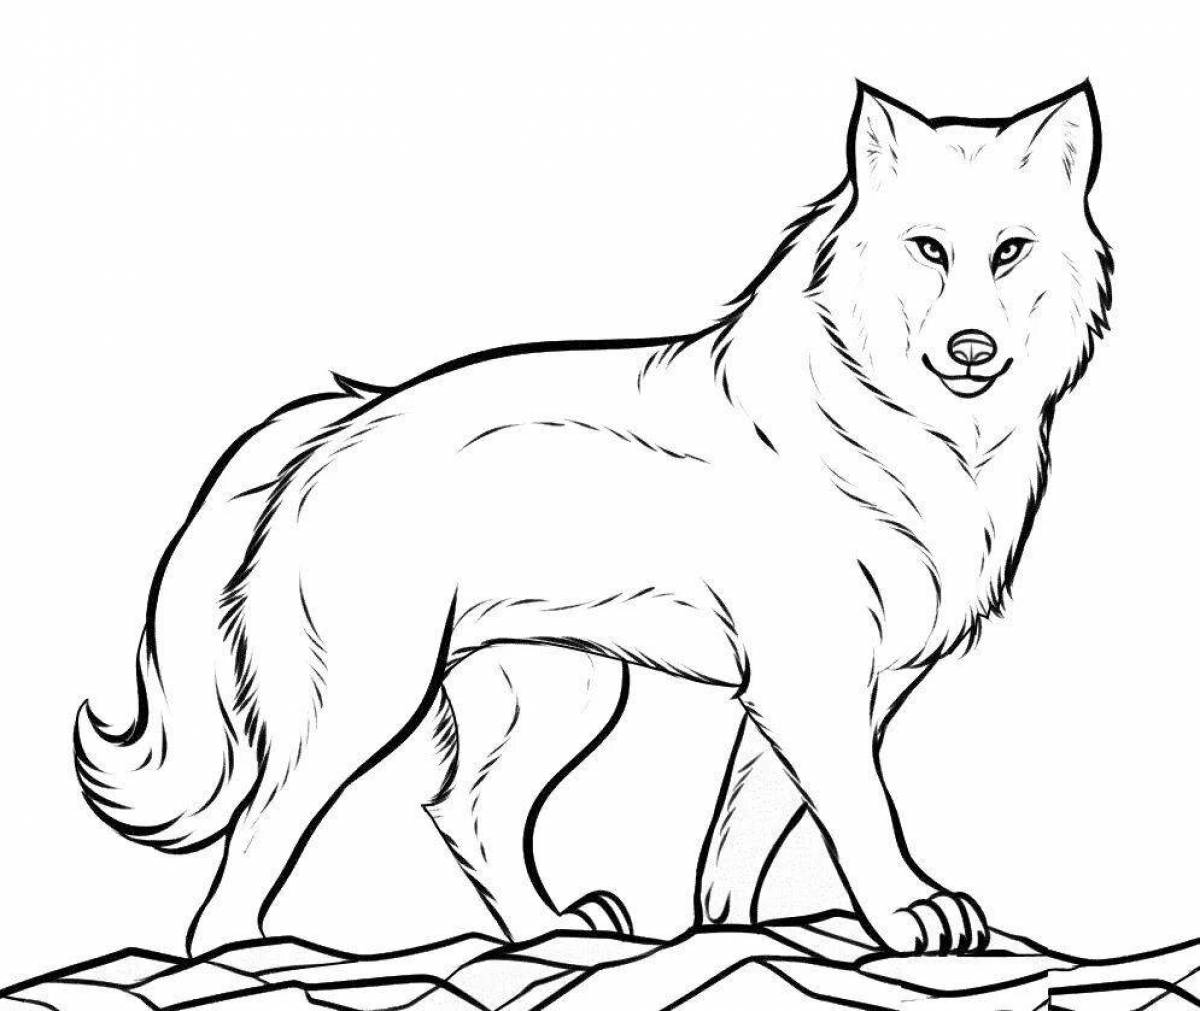 Fearless wolfoo coloring book